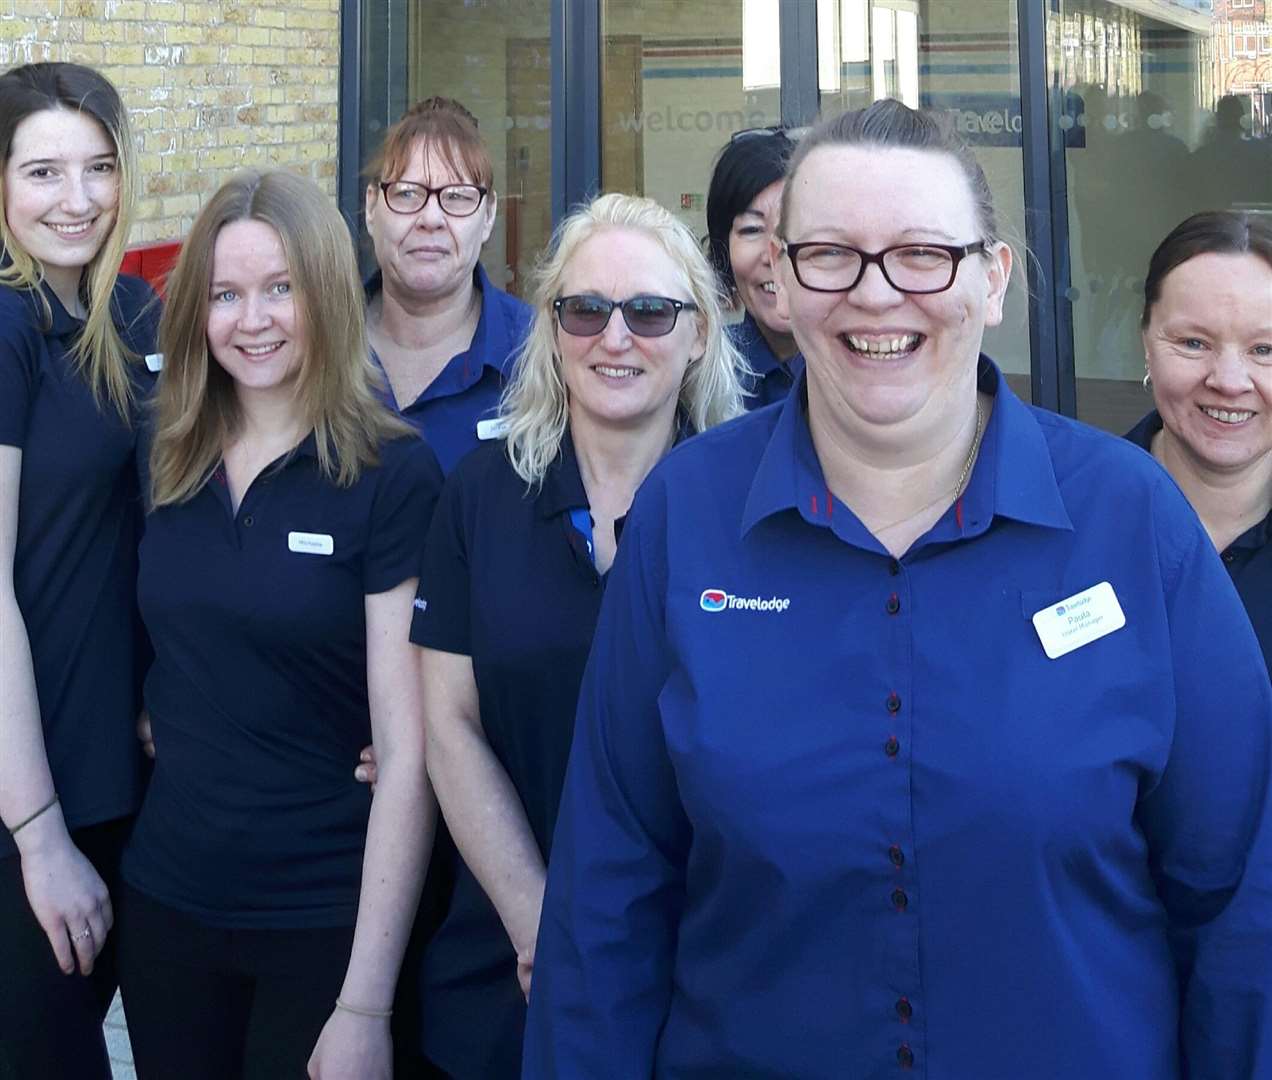 Dover Travelodge manager Paula Brown and her staff.